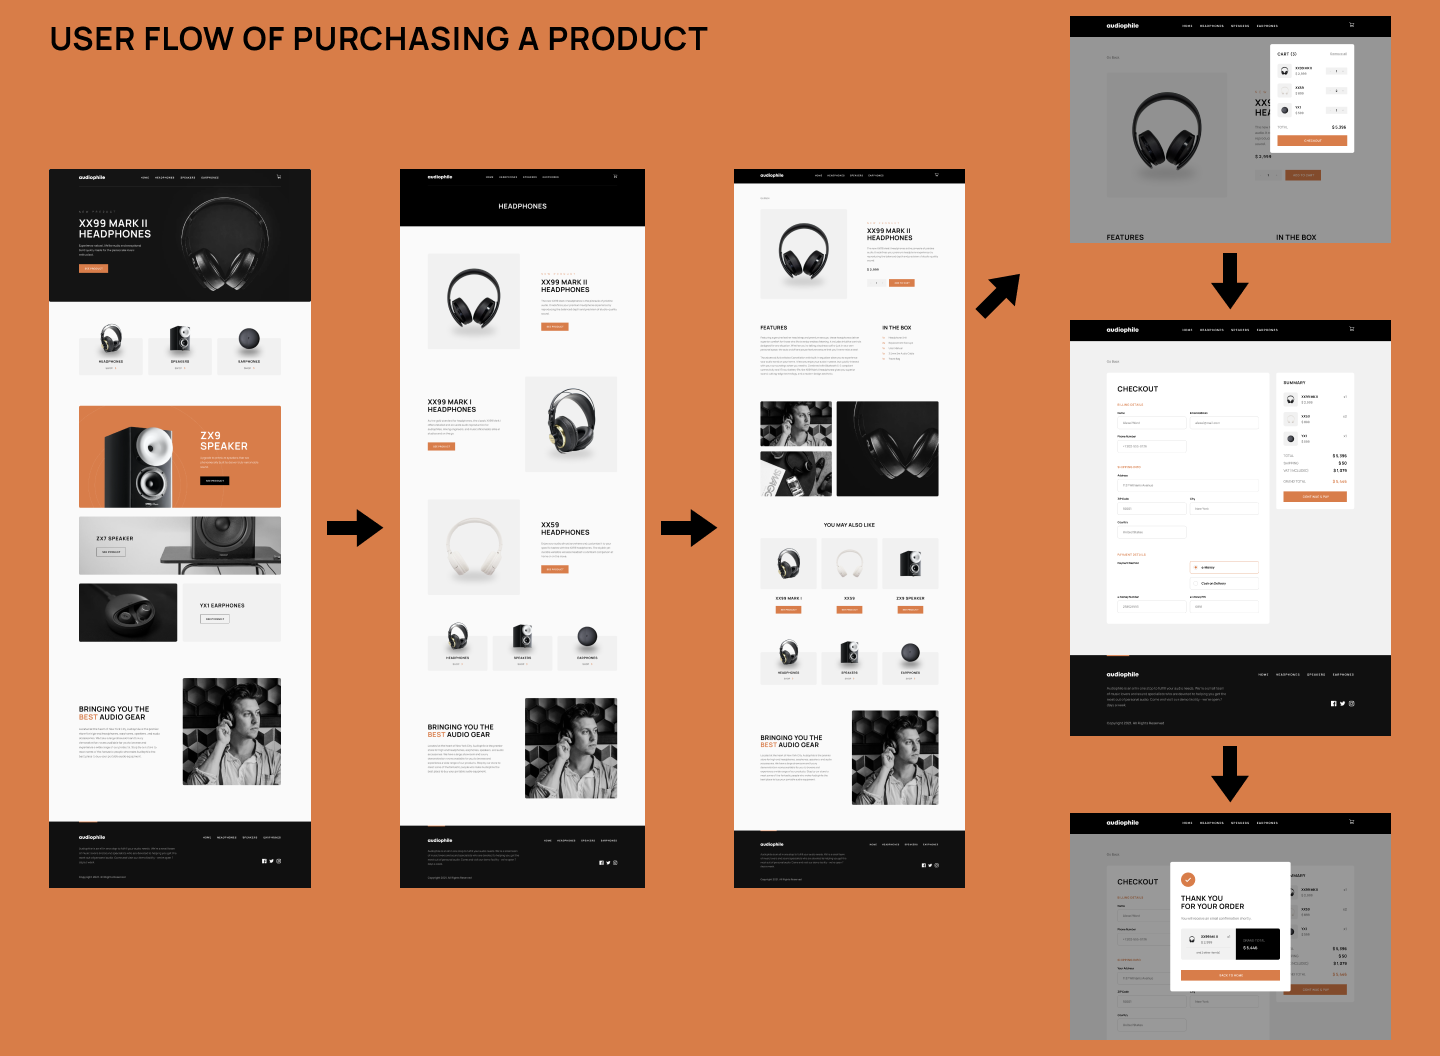 Screens displaying the user flow for purchasing products